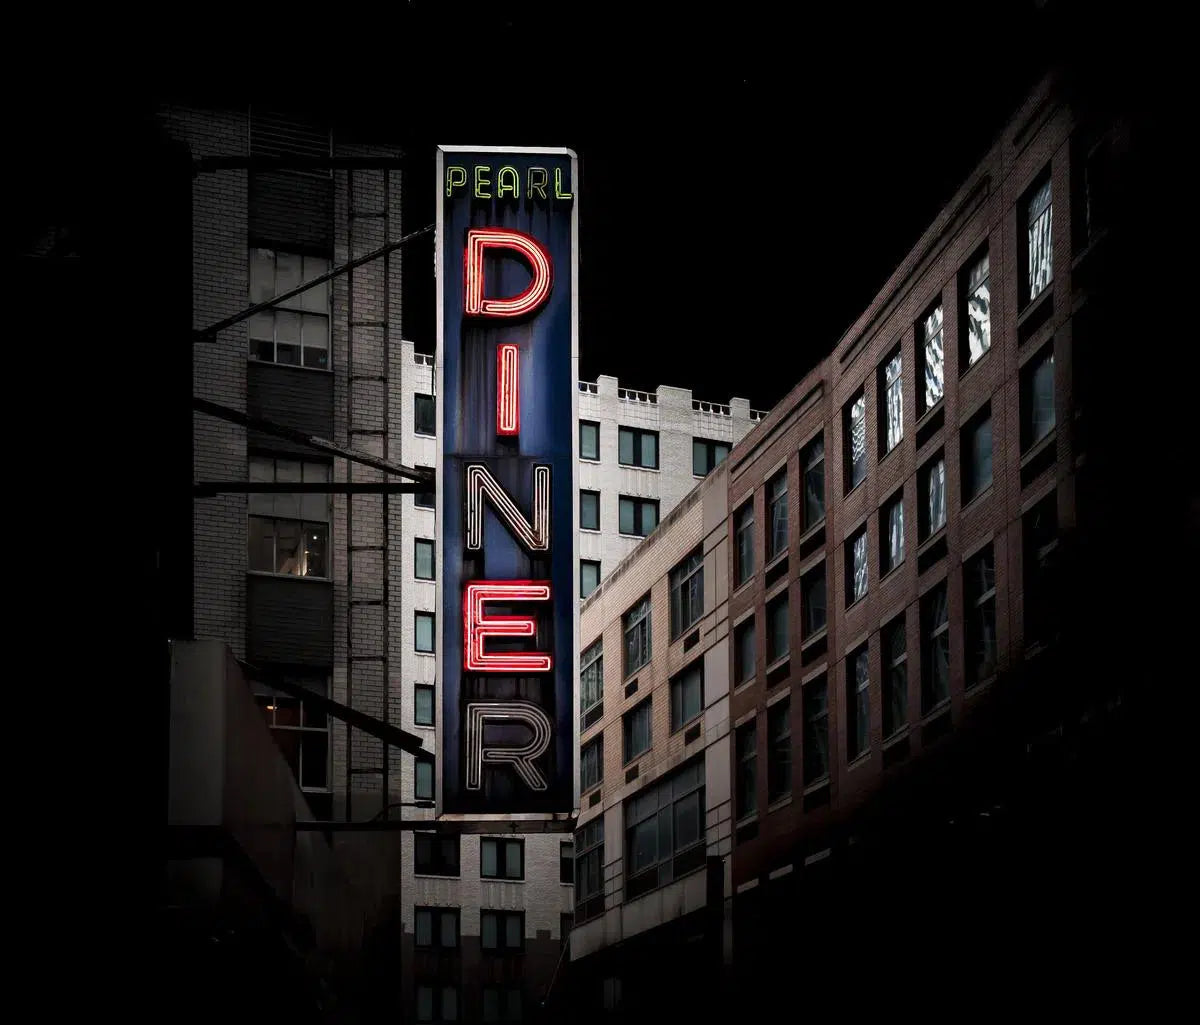 Diner, by J S Cela-PurePhoto